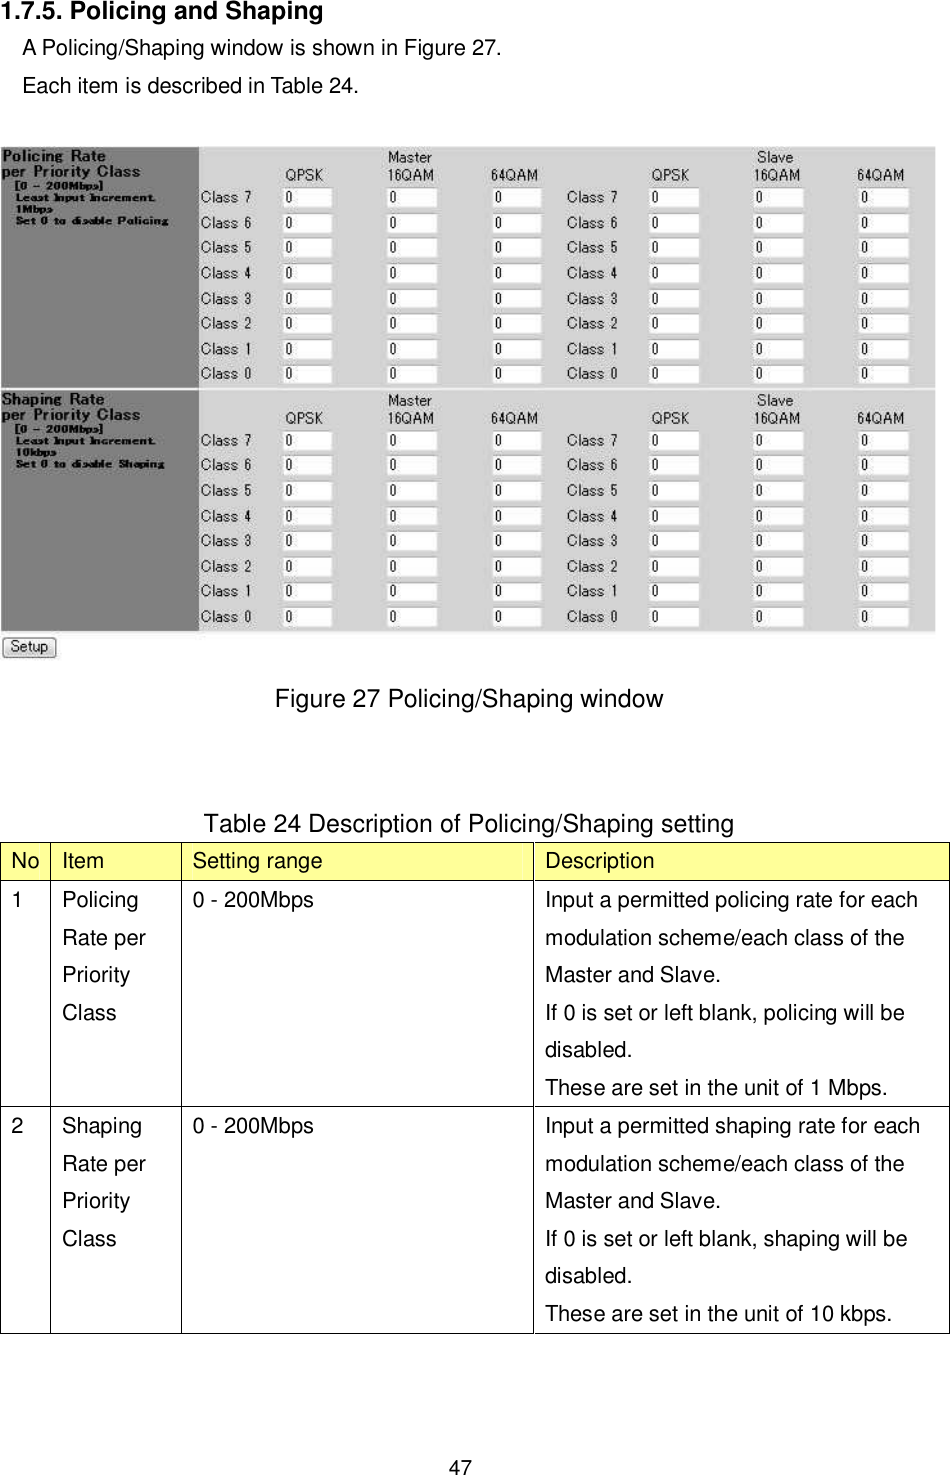    47  1.7.5. Policing and Shaping A Policing/Shaping window is shown in Figure 27. Each item is described in Table 24.   Figure 27 Policing/Shaping window   Table 24 Description of Policing/Shaping setting No Item  Setting range  Description 1  Policing Rate per Priority Class 0 - 200Mbps  Input a permitted policing rate for each modulation scheme/each class of the Master and Slave. If 0 is set or left blank, policing will be disabled.   These are set in the unit of 1 Mbps. 2  Shaping Rate per Priority Class 0 - 200Mbps  Input a permitted shaping rate for each modulation scheme/each class of the Master and Slave. If 0 is set or left blank, shaping will be disabled. These are set in the unit of 10 kbps.   